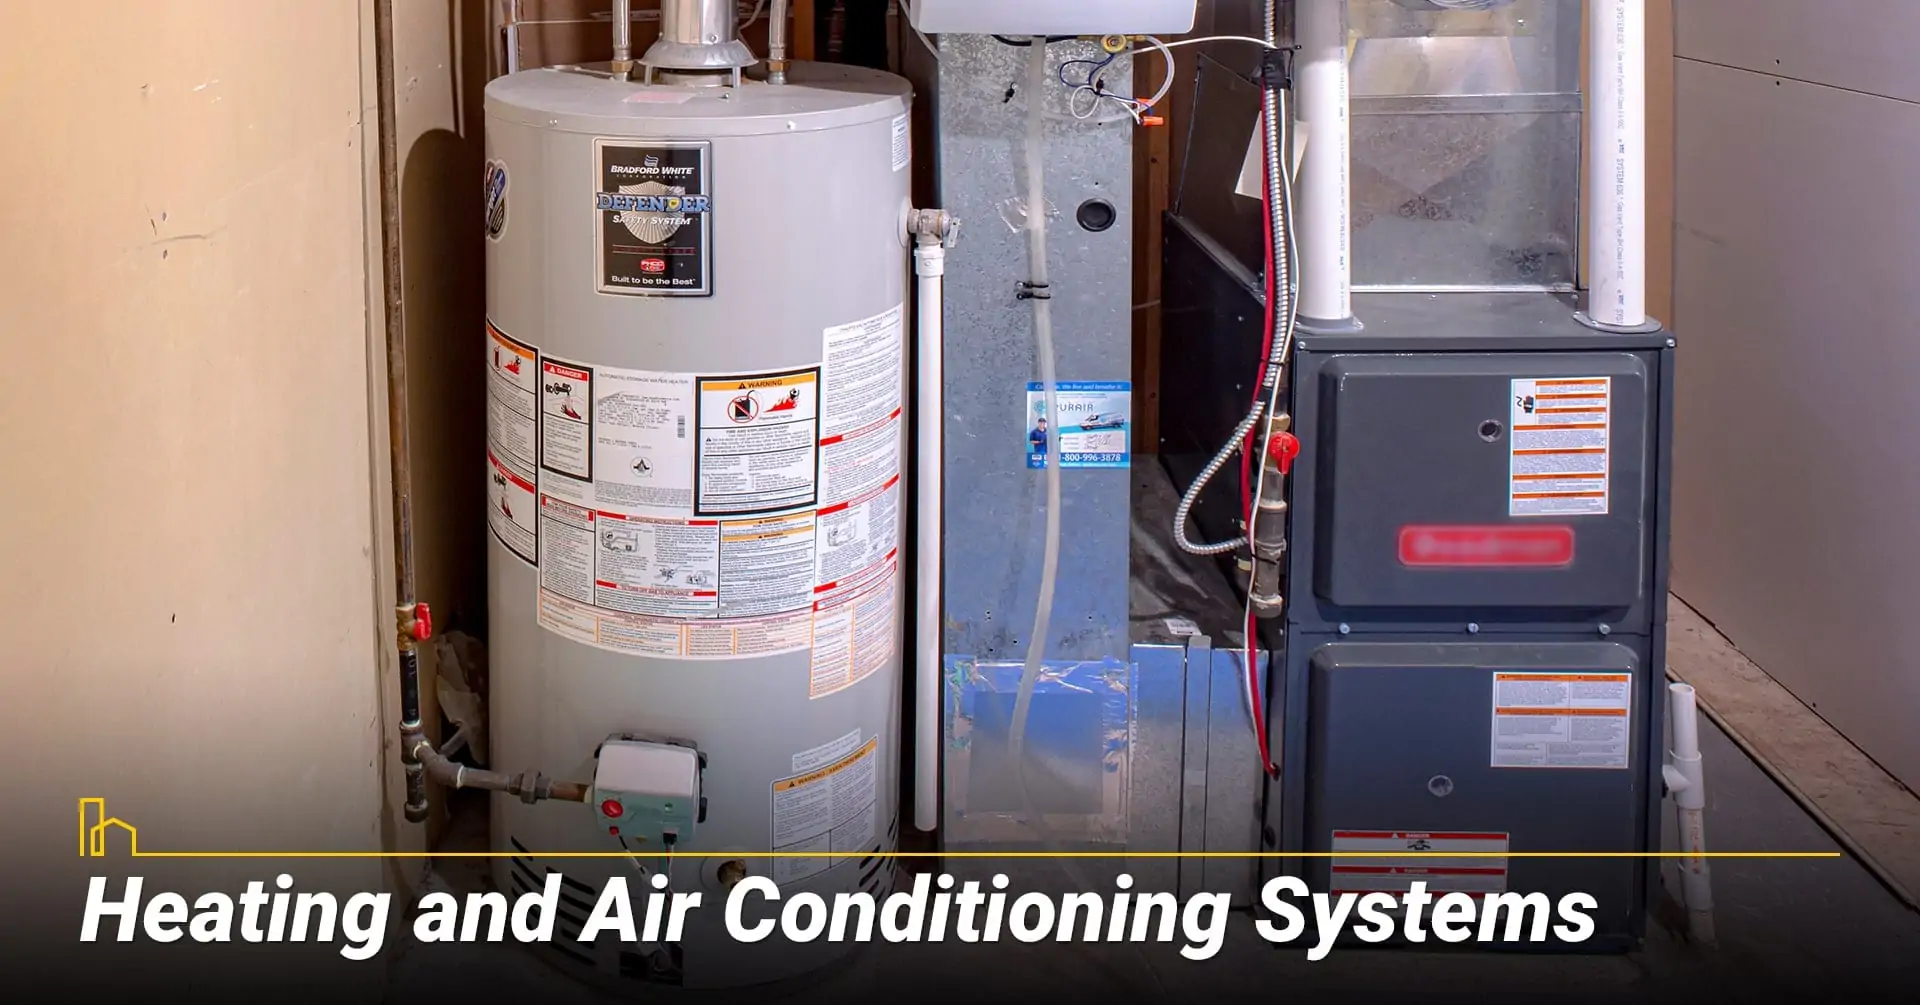 Heating and Air Conditioning Systems, make sure your heating and AC systems work properly